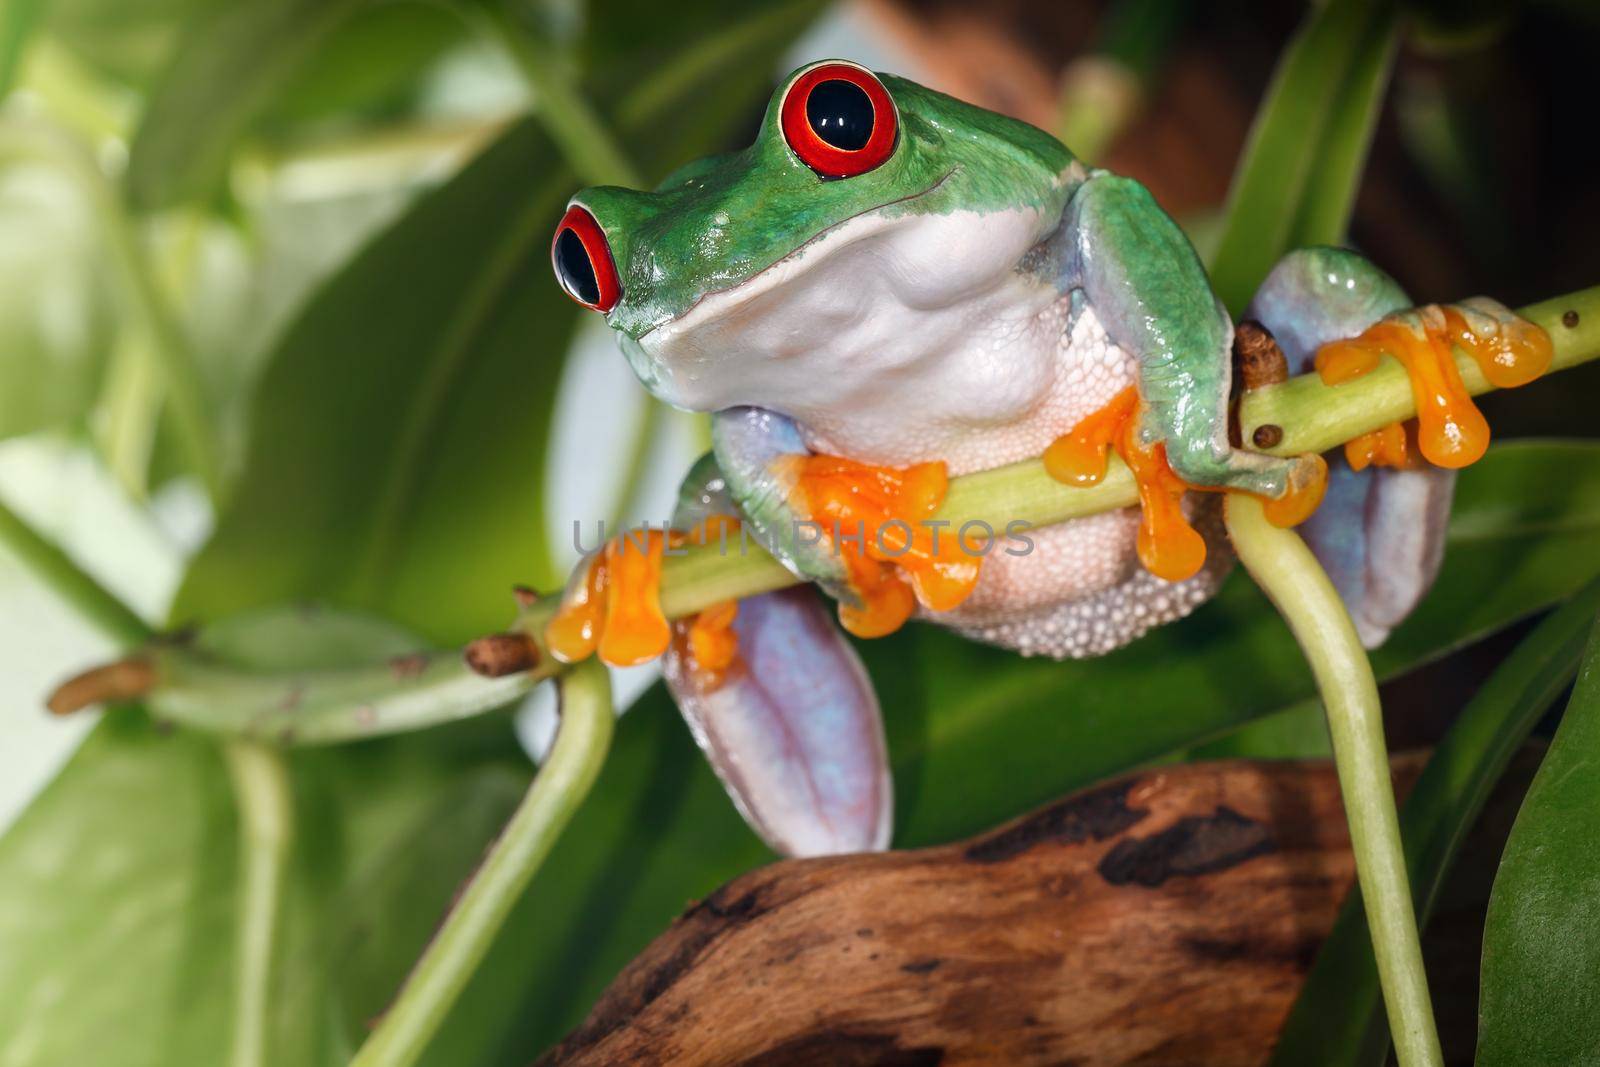 Red eyed tree frog with big gums sitting on the plant stem